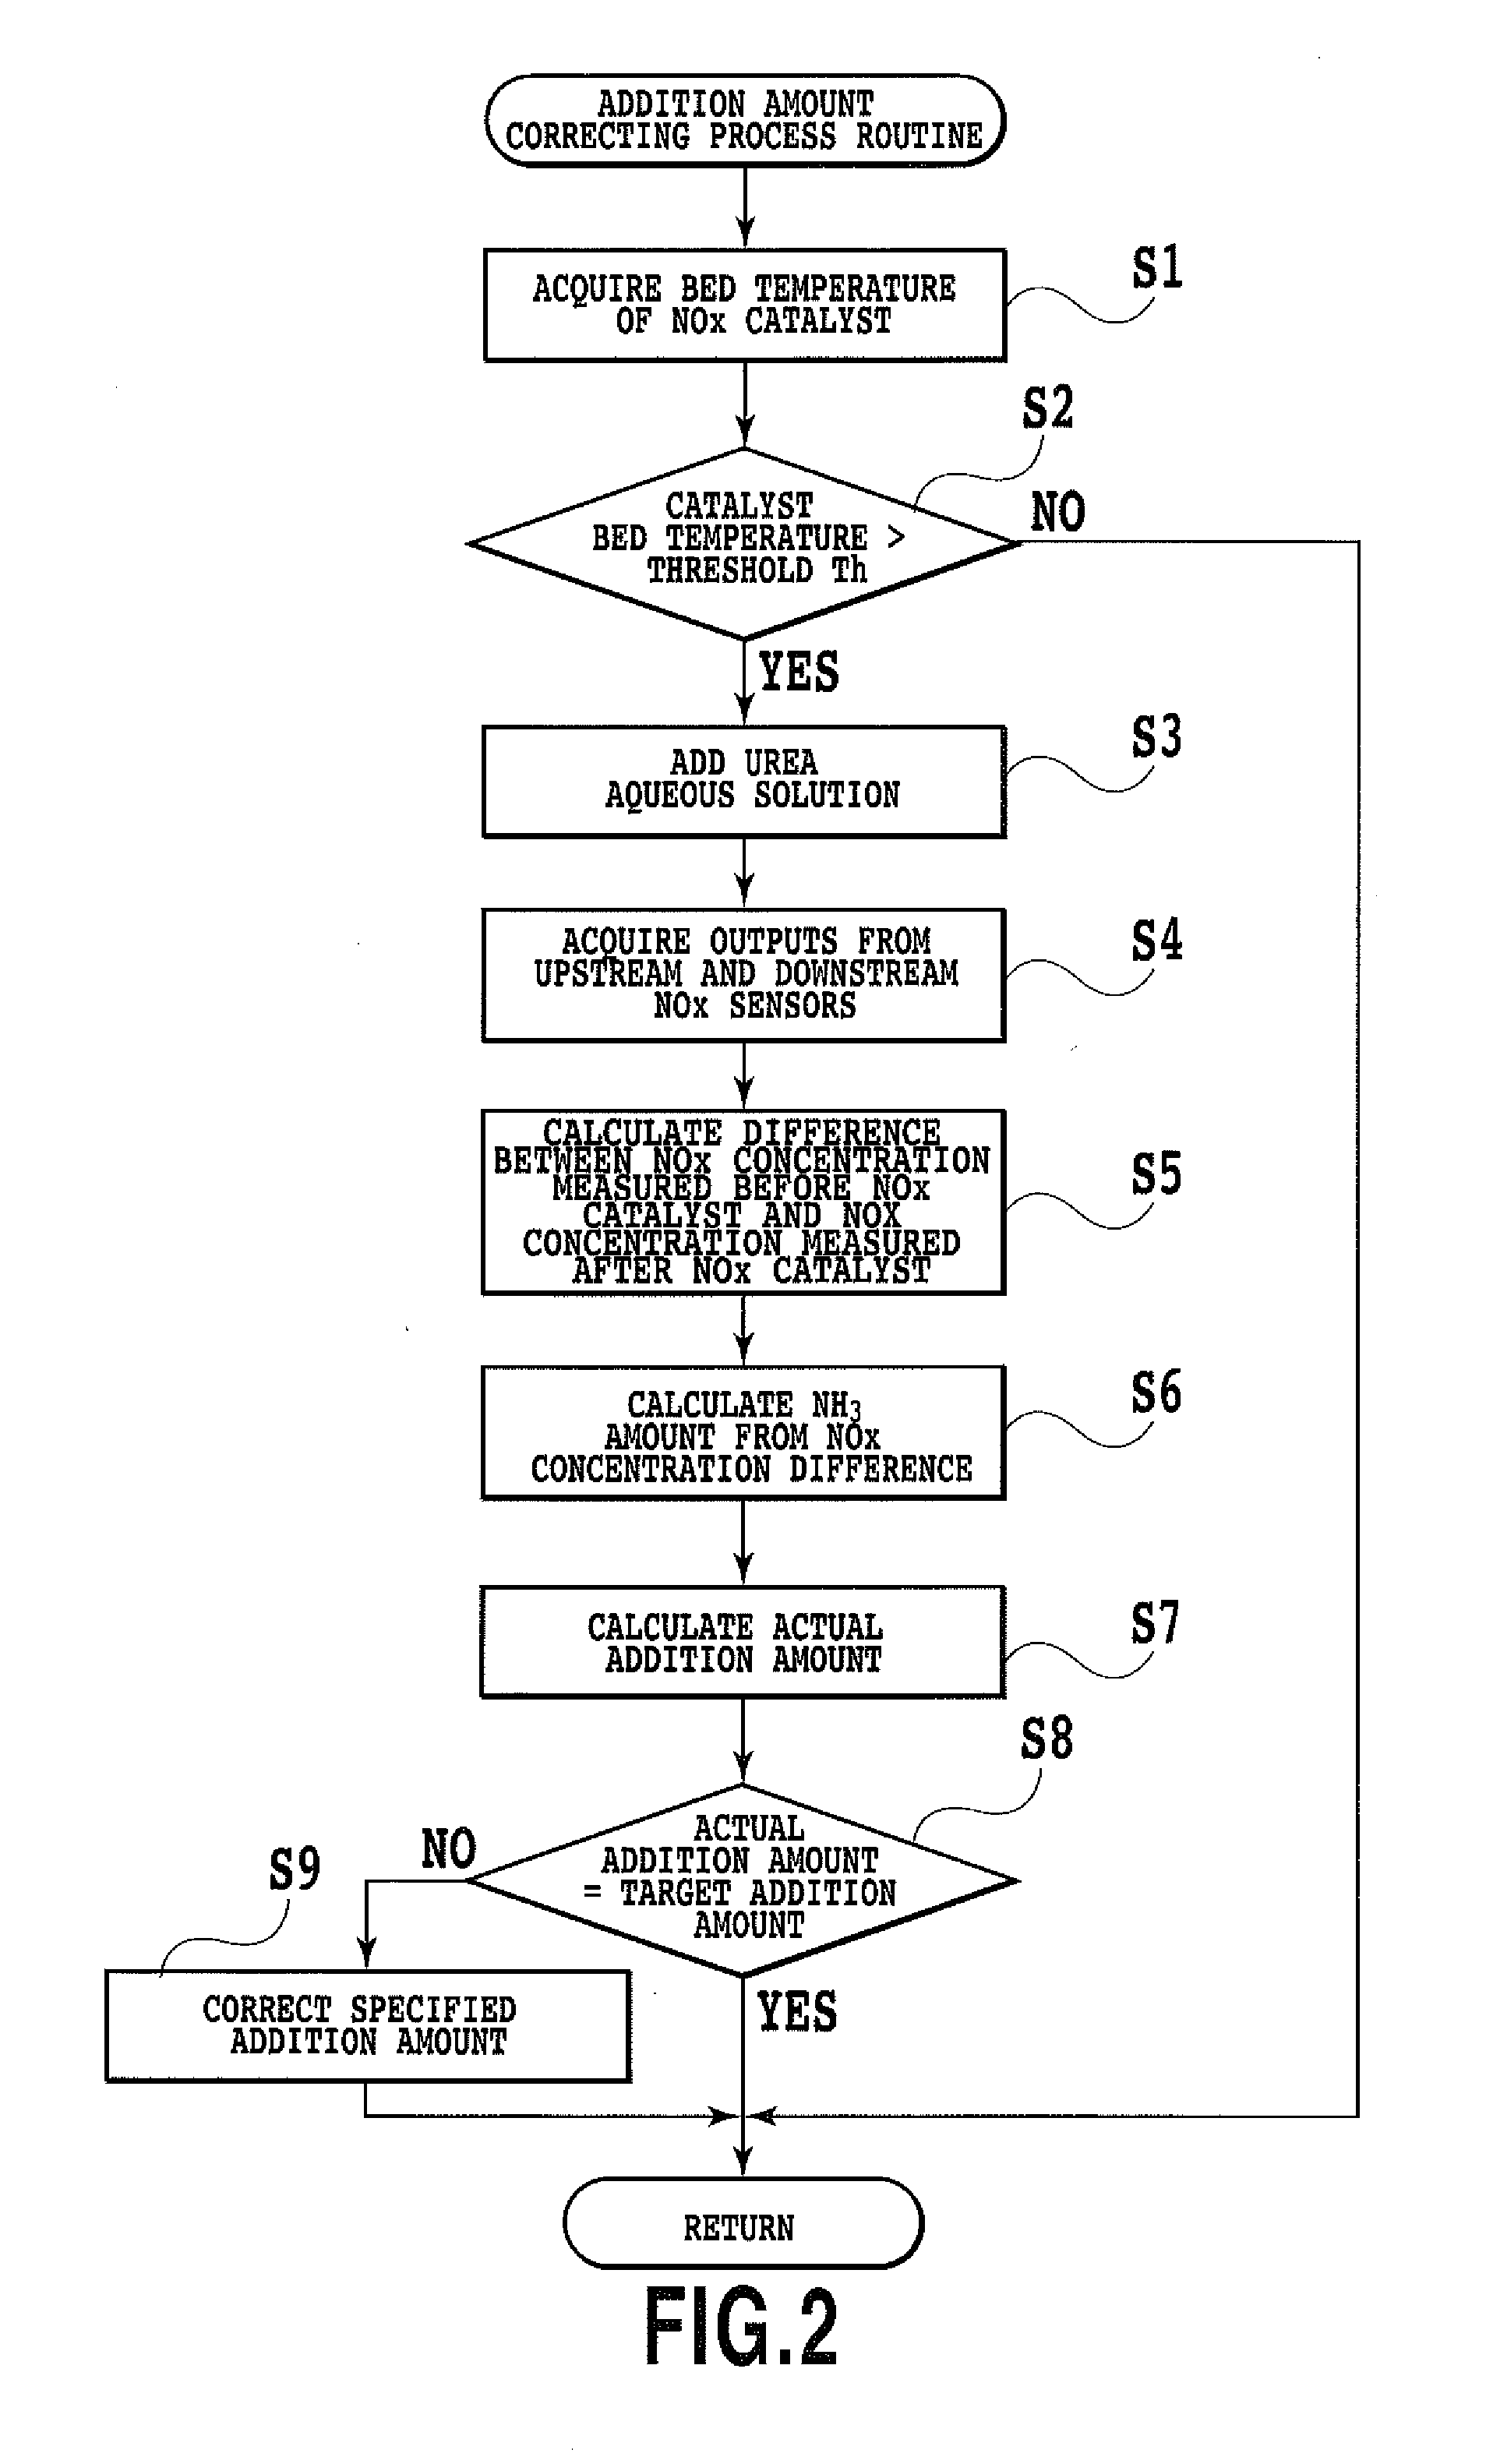 Exhaust purification apparatus for internal combustion engine